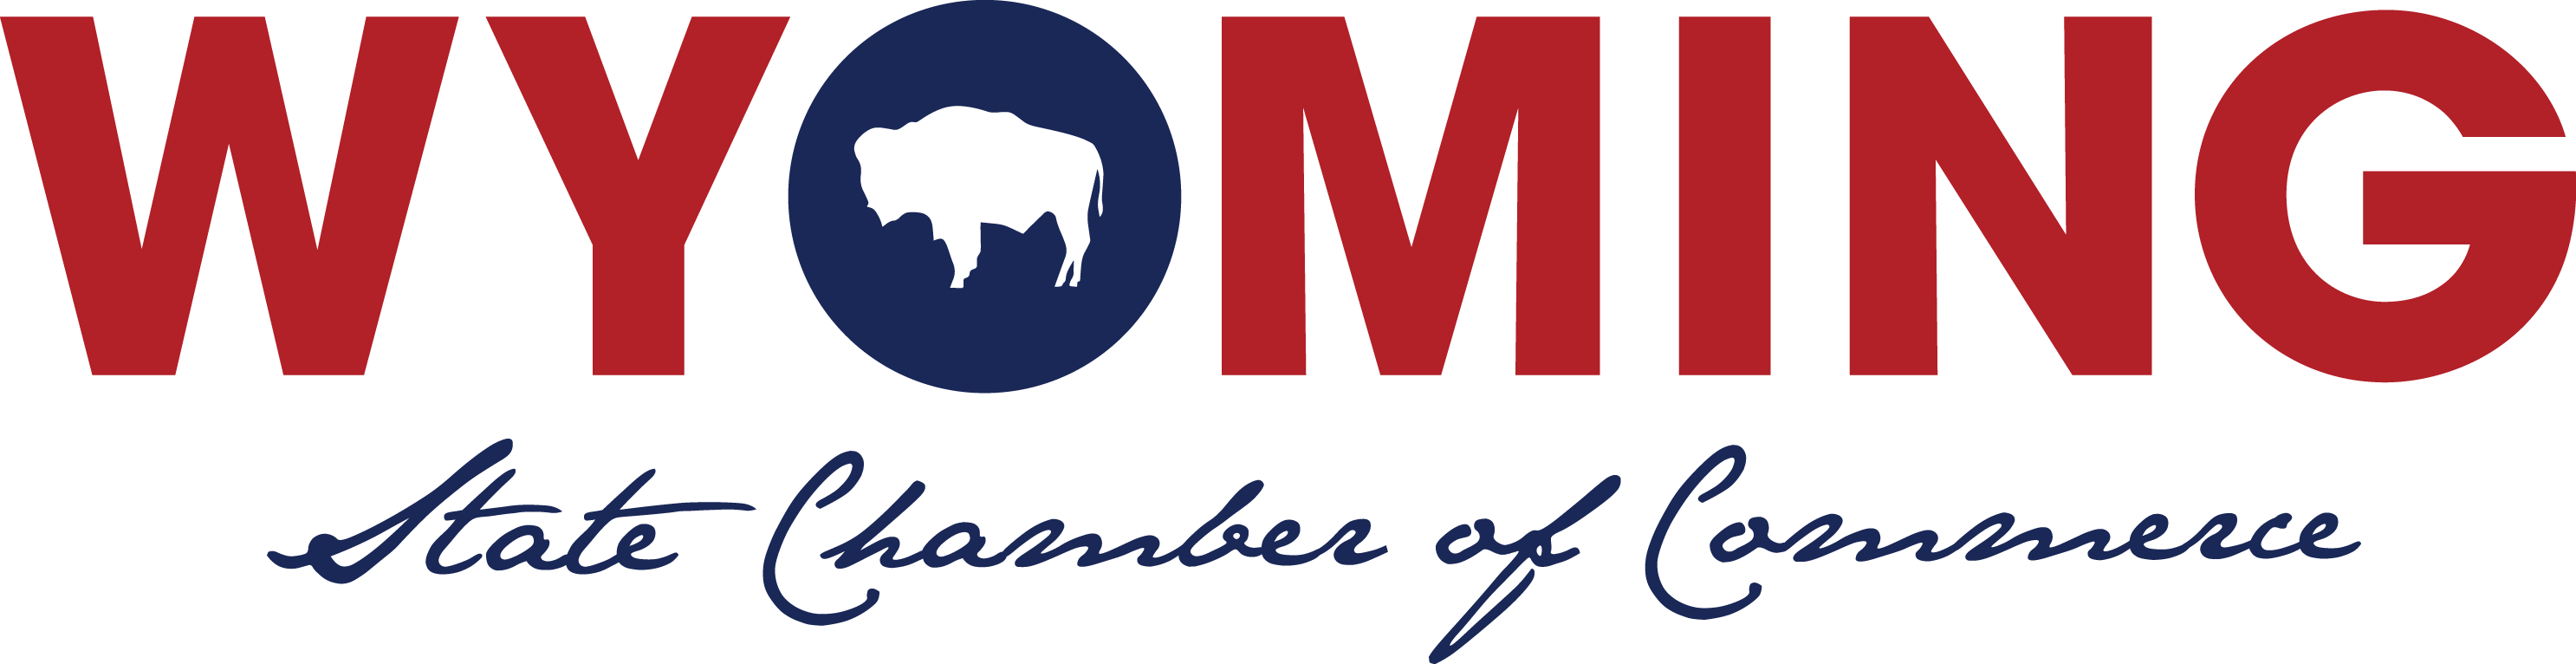 Wyoming State Chamber of Commerce's Logo